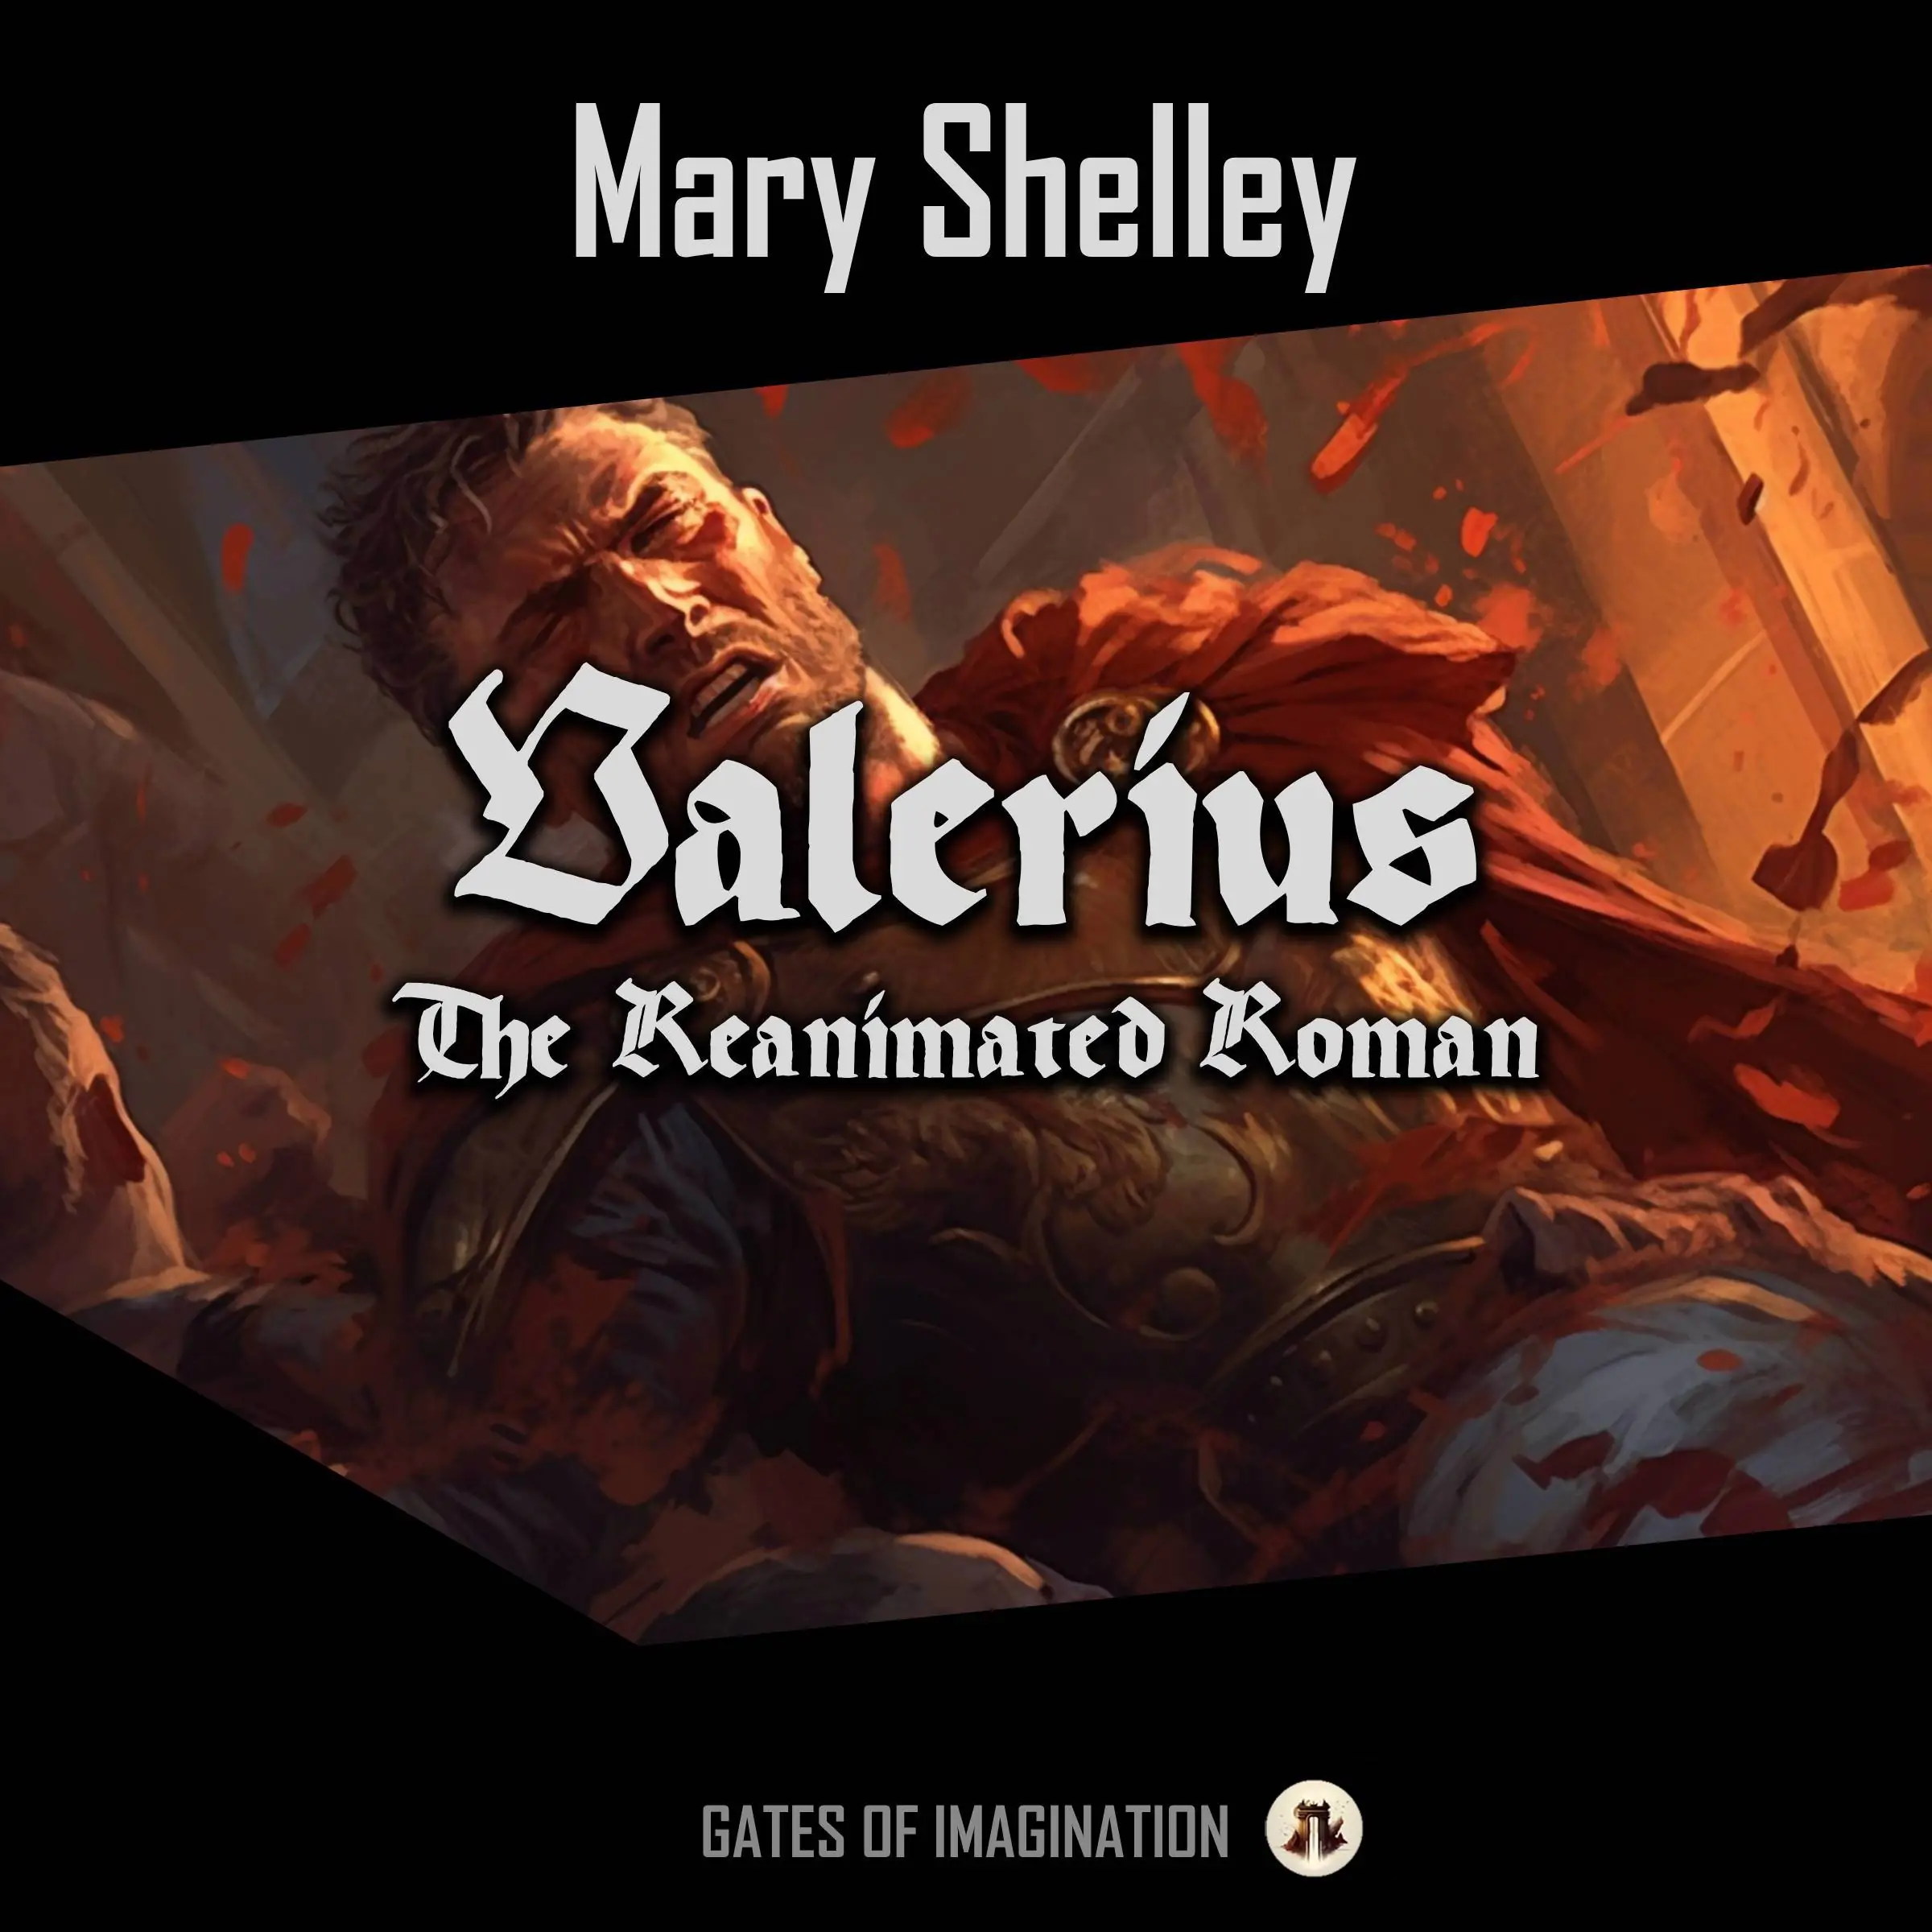 Valerius by Mary Shelley Audiobook